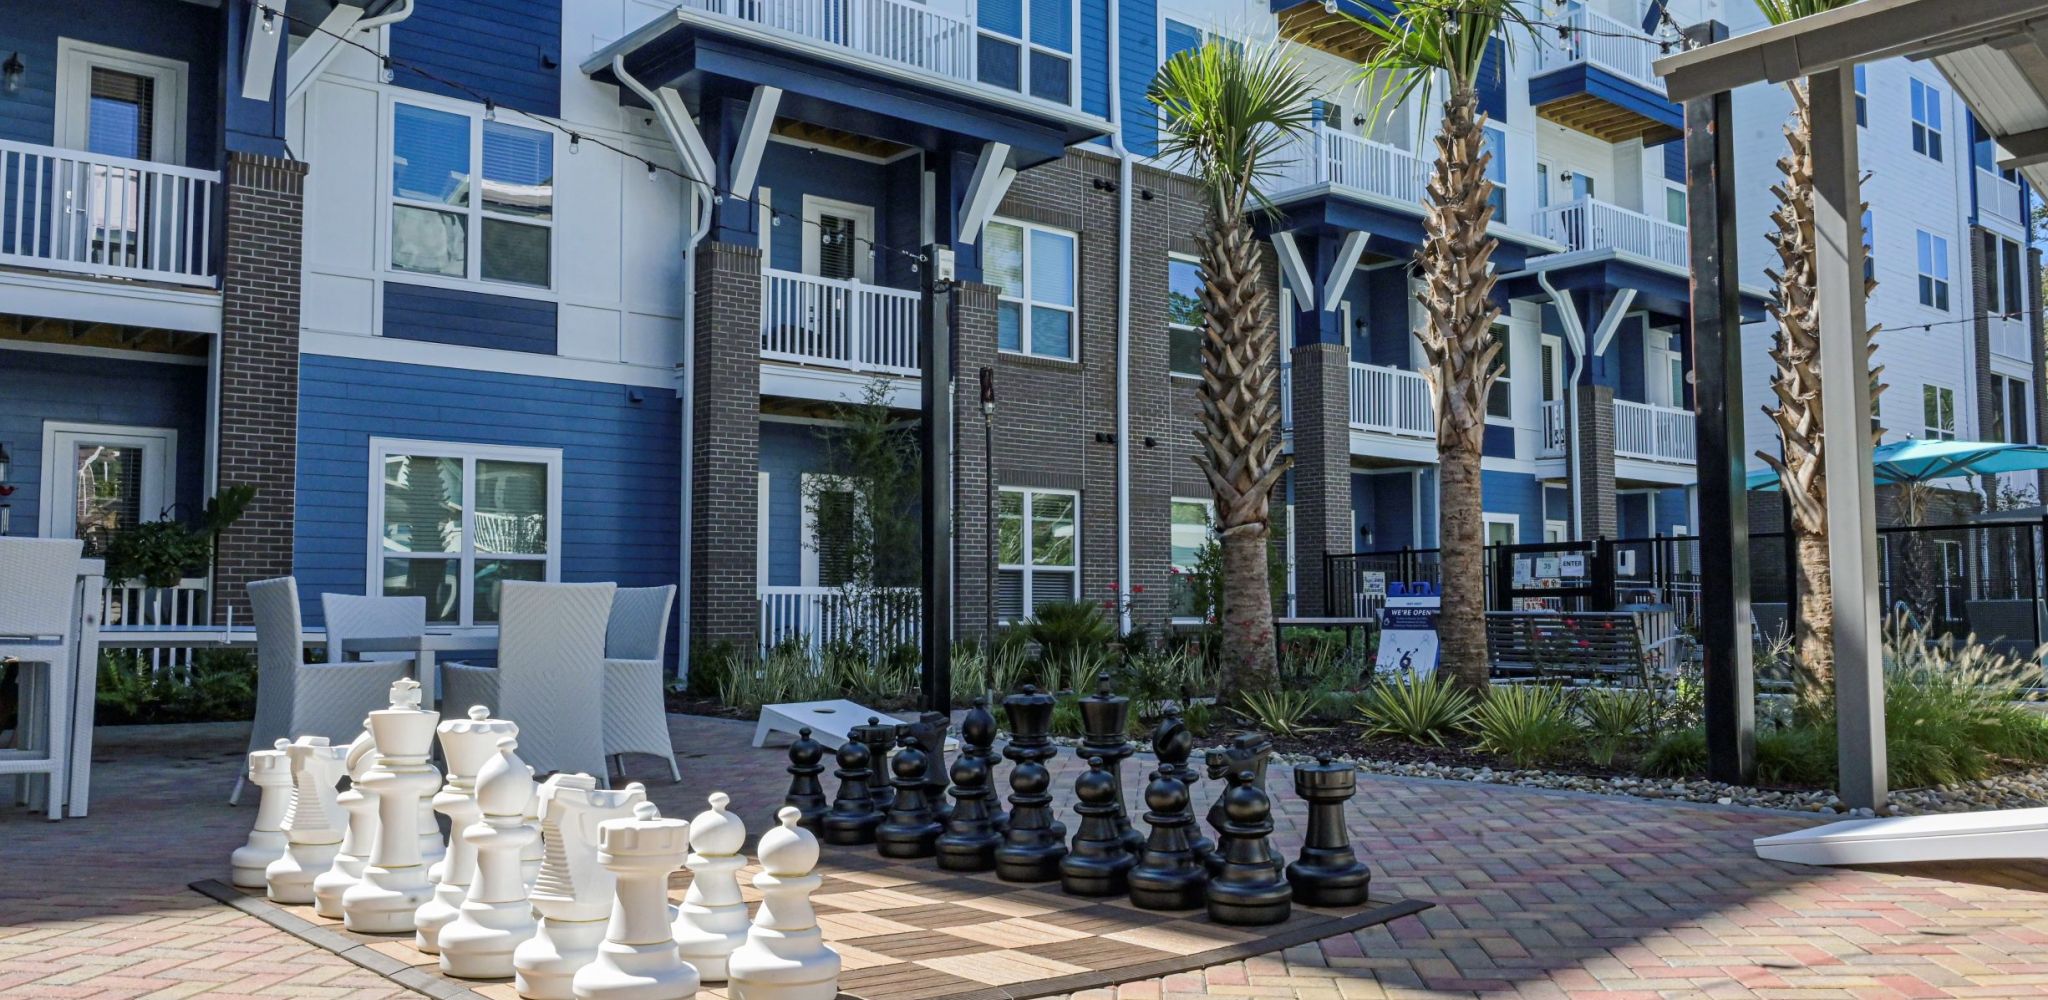 Hawthorne at Indy West outdoor area with jumbo chess game and surrounding seating and palm trees